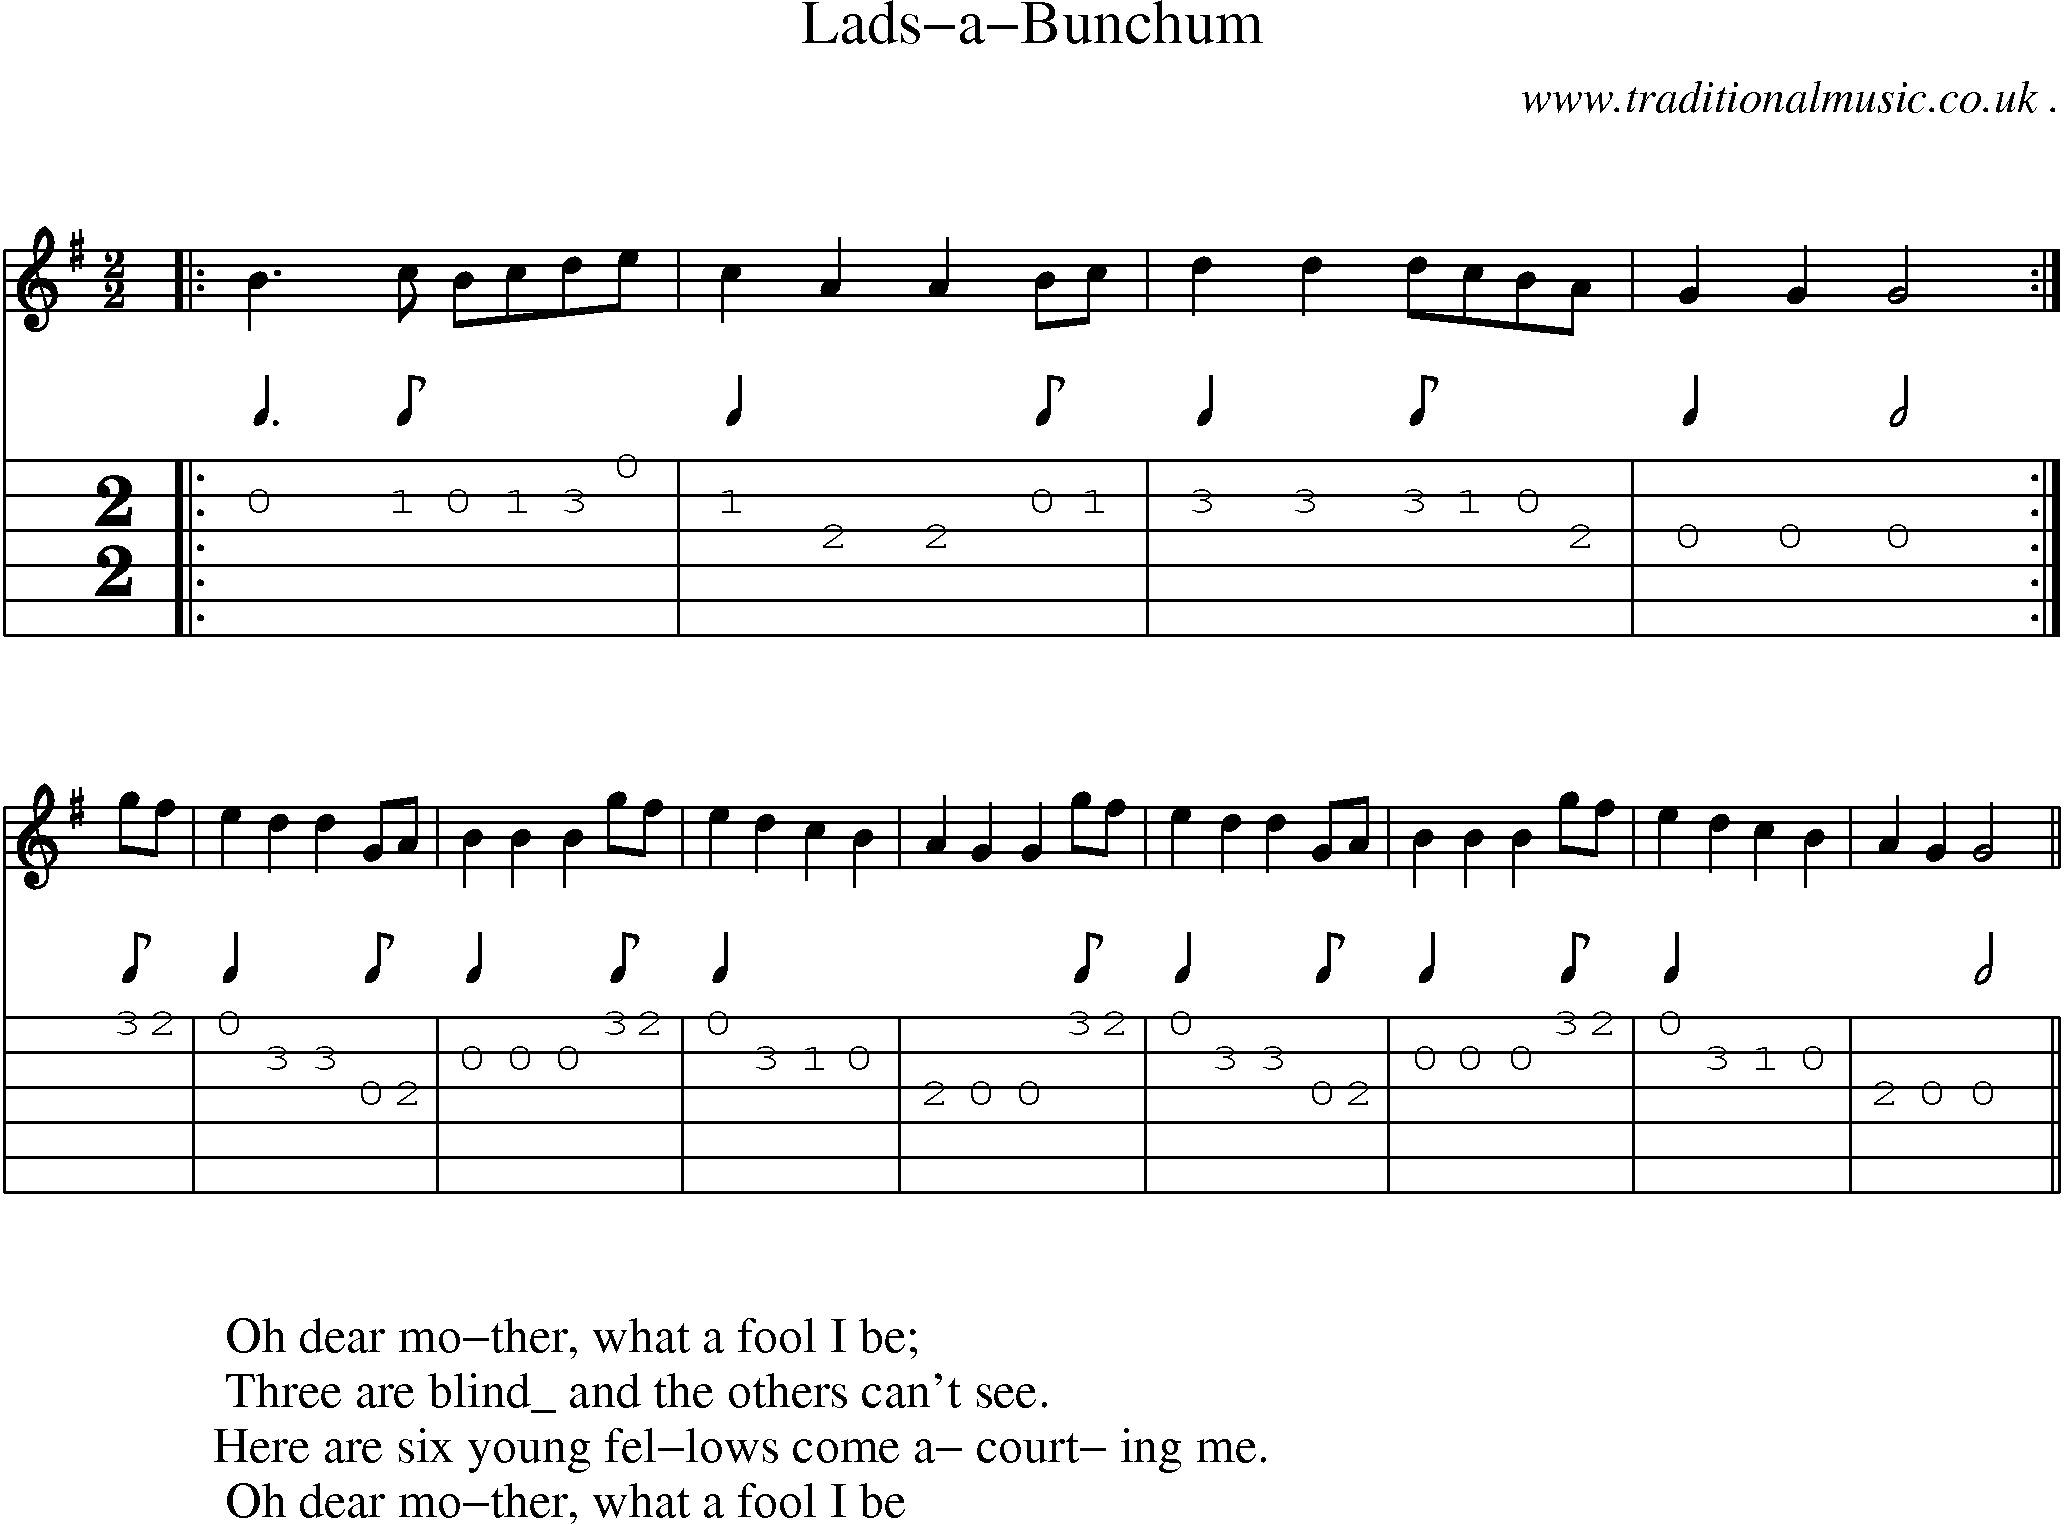 Sheet-Music and Guitar Tabs for Lads-a-bunchum